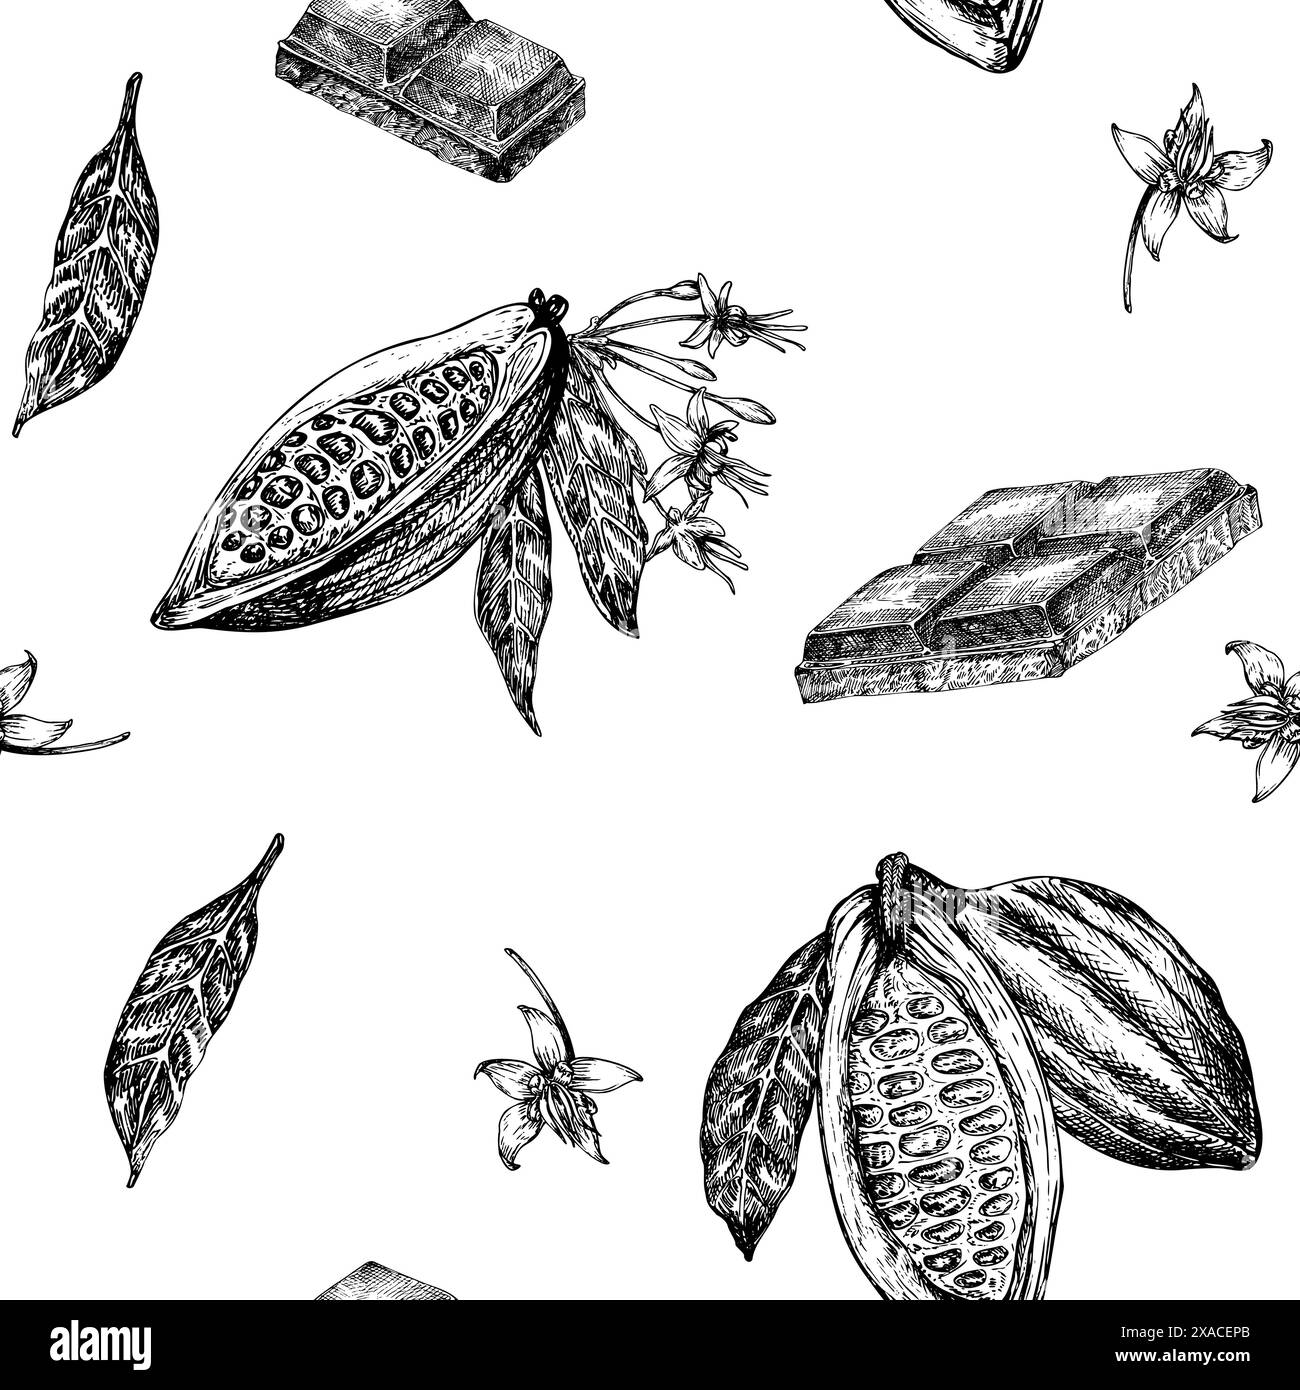 Seamless pattern with cocoa fruit and chocolate graphic illustration, hand drawn sketch of vegetable, leaves, flowers. Botanical drawing of tropical Stock Photo